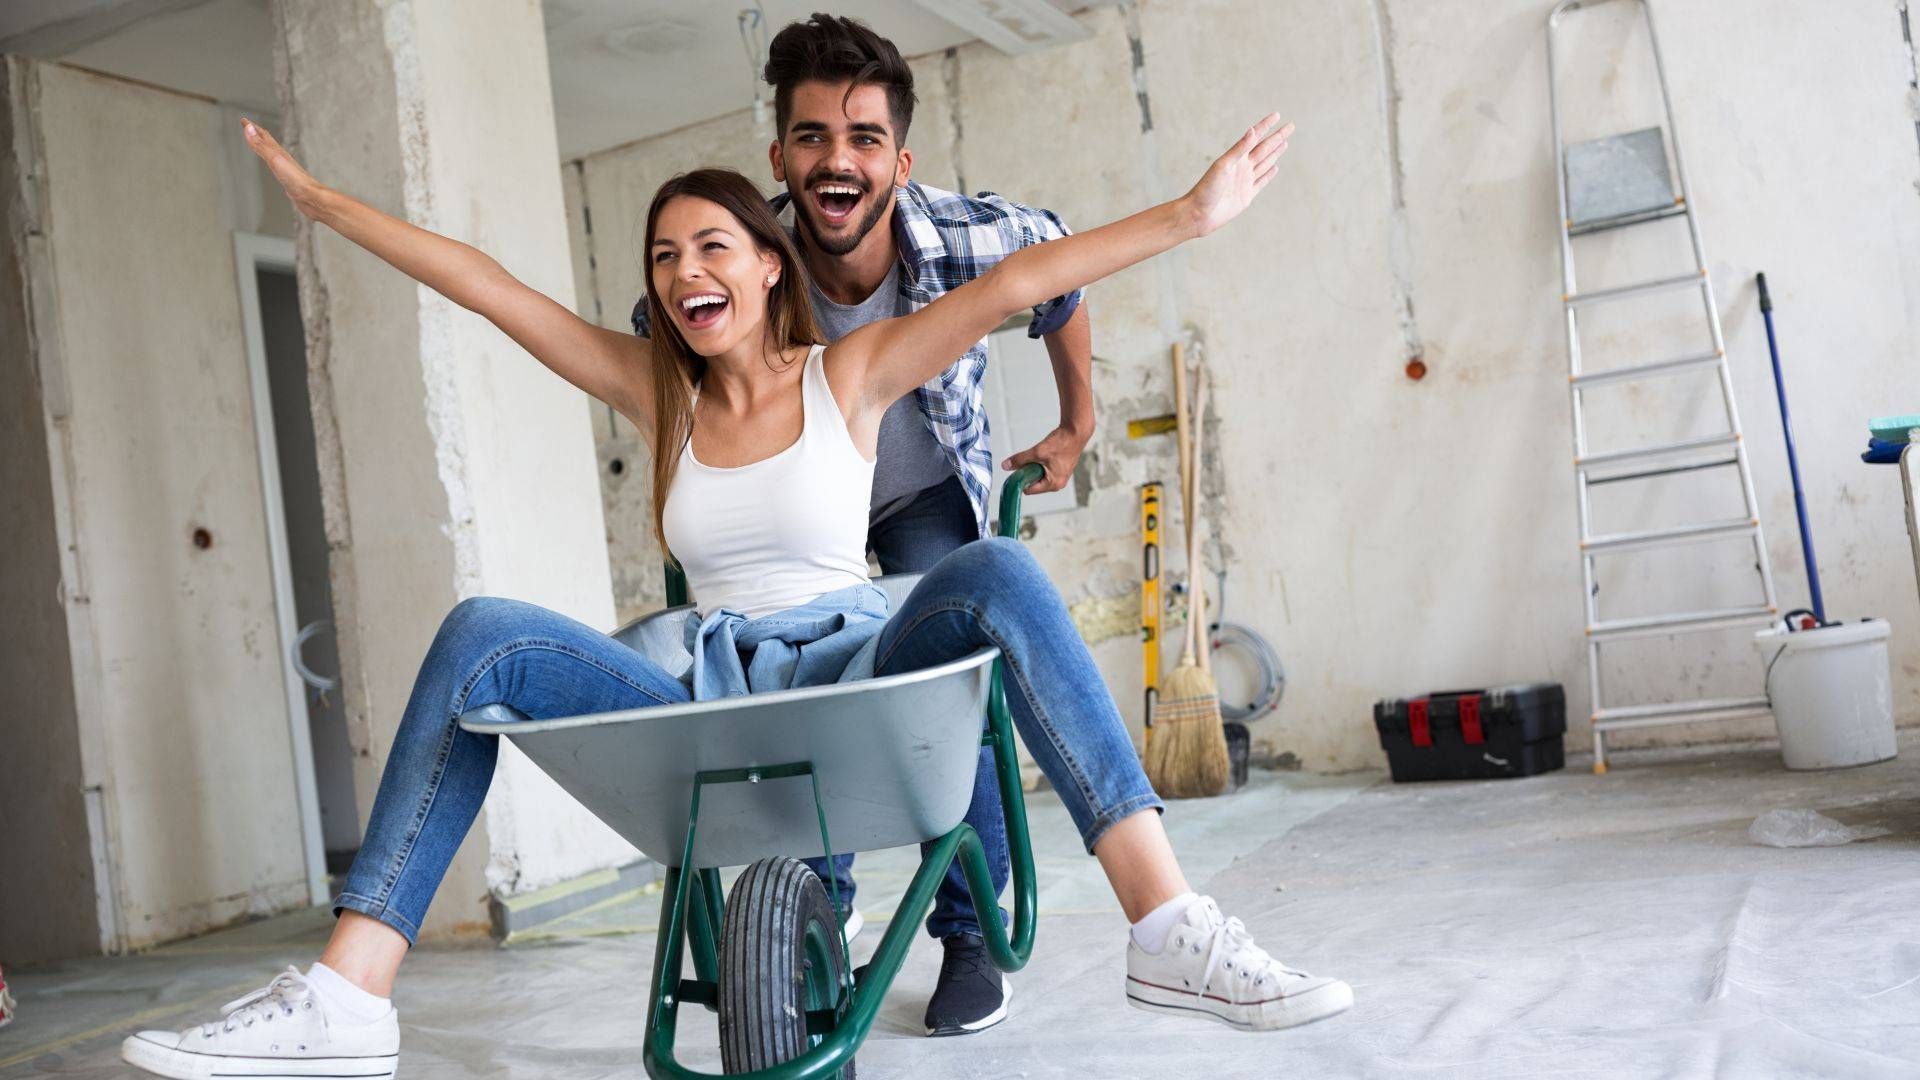 Is a renovation property right for me? Your questions answered